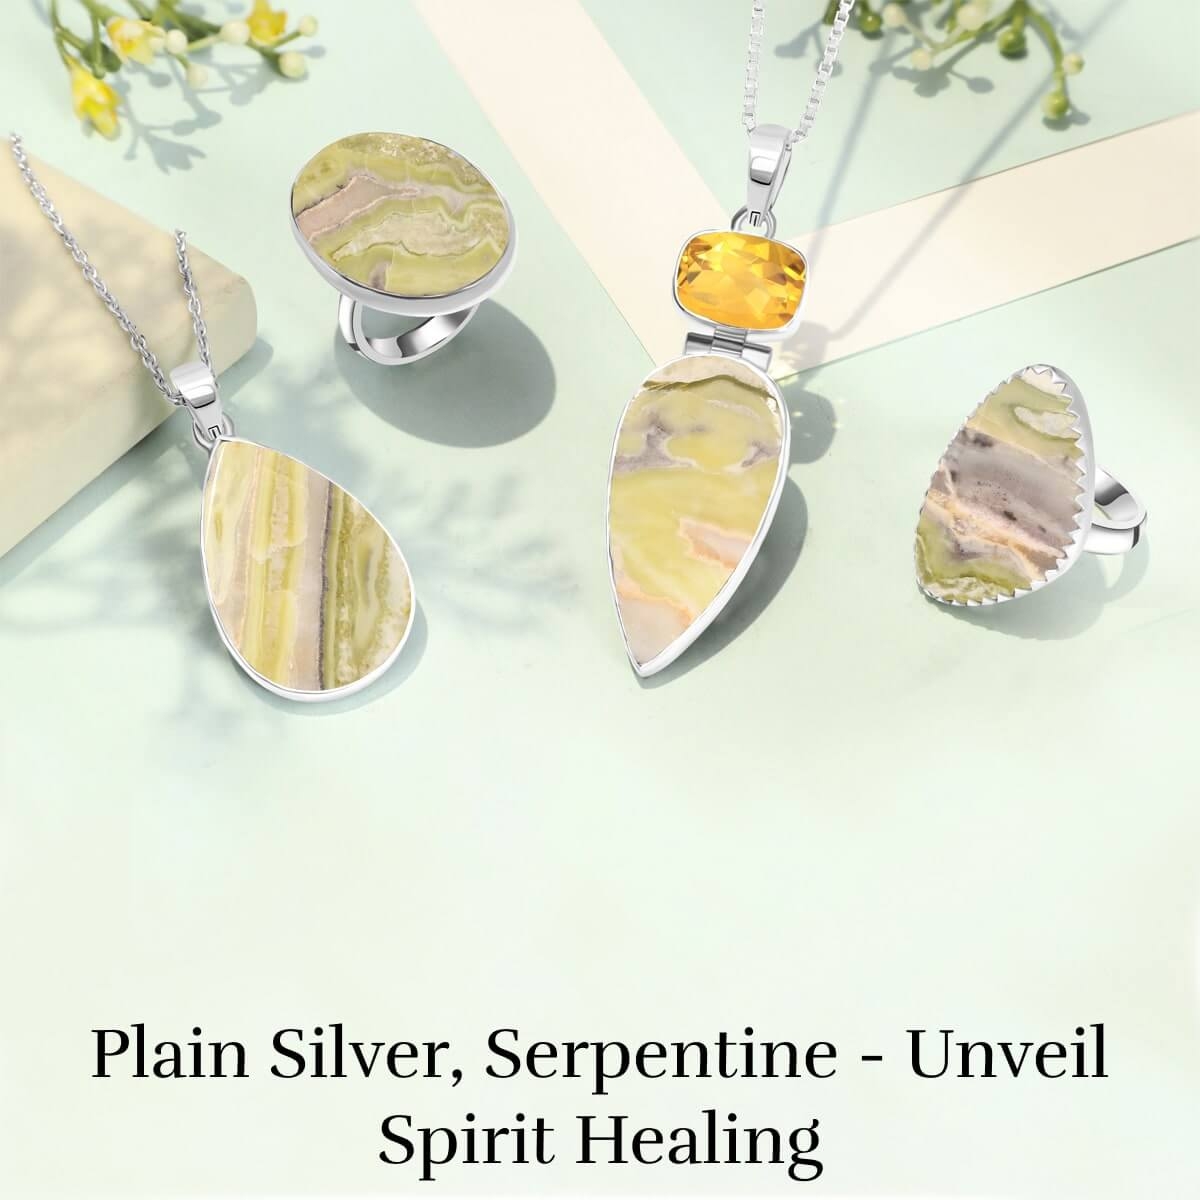 Plain Silver Jewelry Made of Serpentine Encourages Spirit Healing